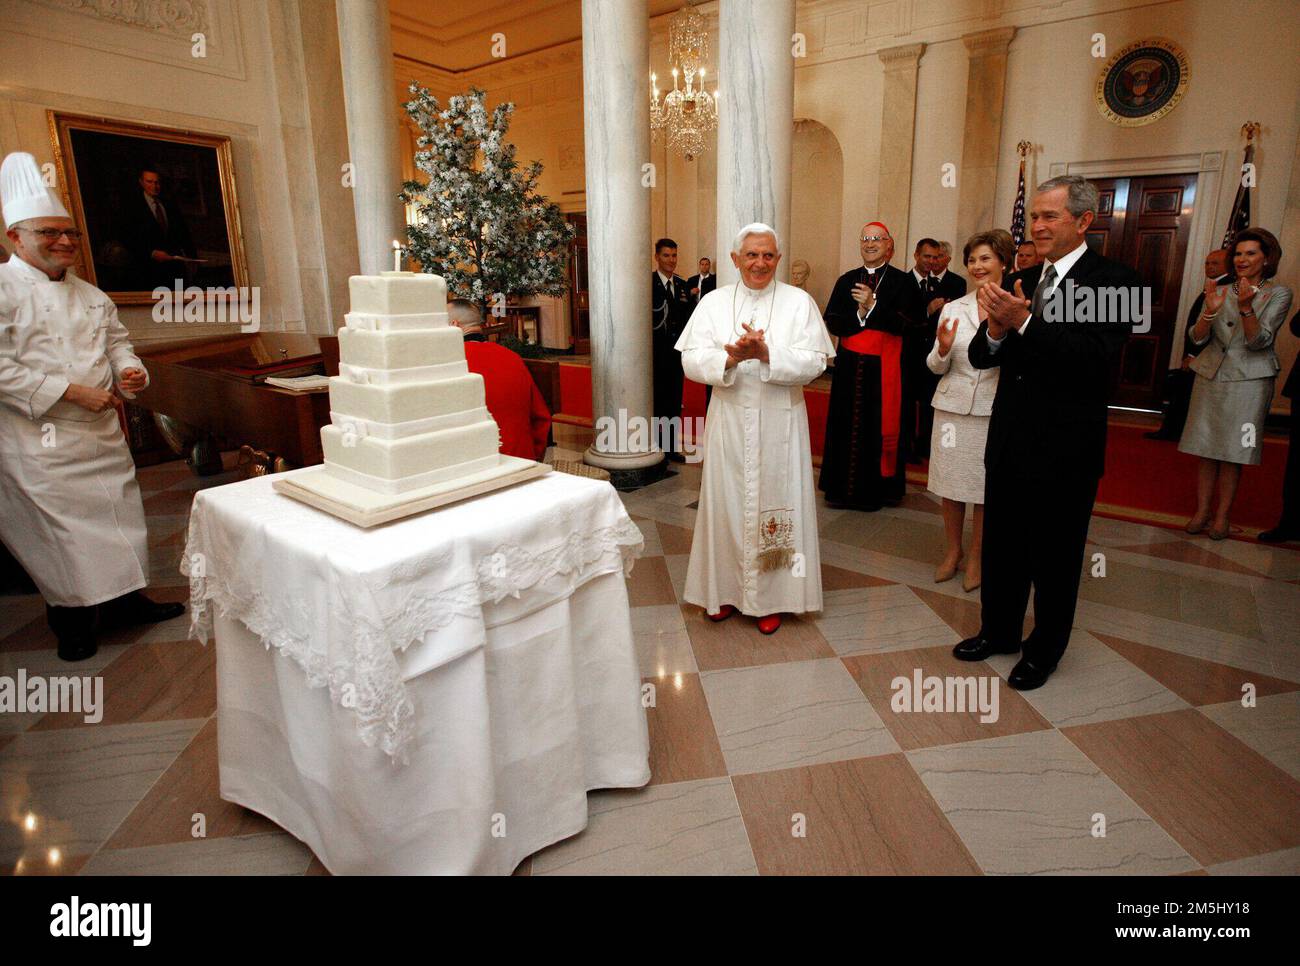 United States President George W. Bush and Mrs. Laura Bush lead the celebration of the 81st birthday of Pope Benedict XVI as he's presented a cake by White House Pastry Chef Bill Yosses Wednesday, April 16, 2008, at the White House. White House photo by Eric Draper. Stock Photo